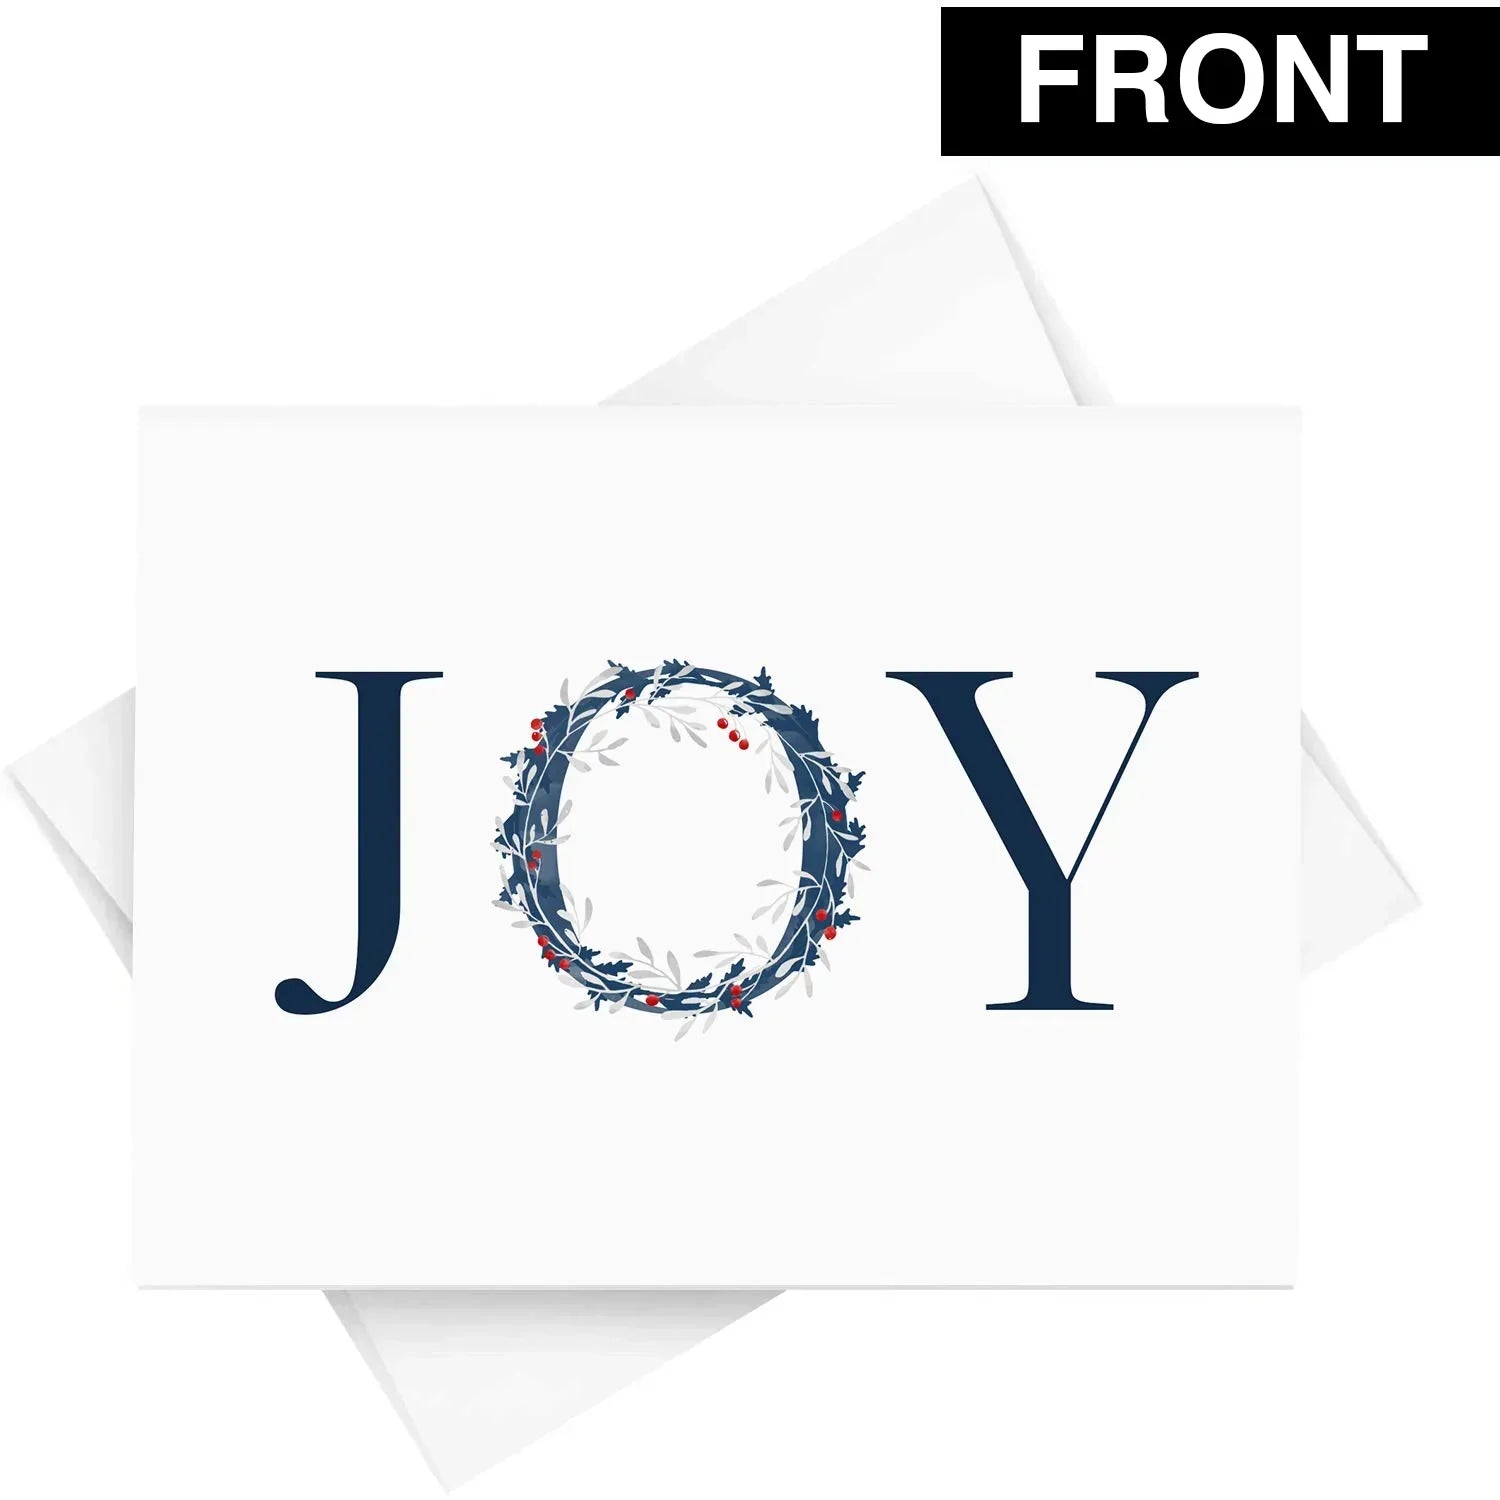 Joy Greeting Cards,  4.25 x 5.5 (A2 Size)  25 Cards and 25 Envelopes. FoldCard